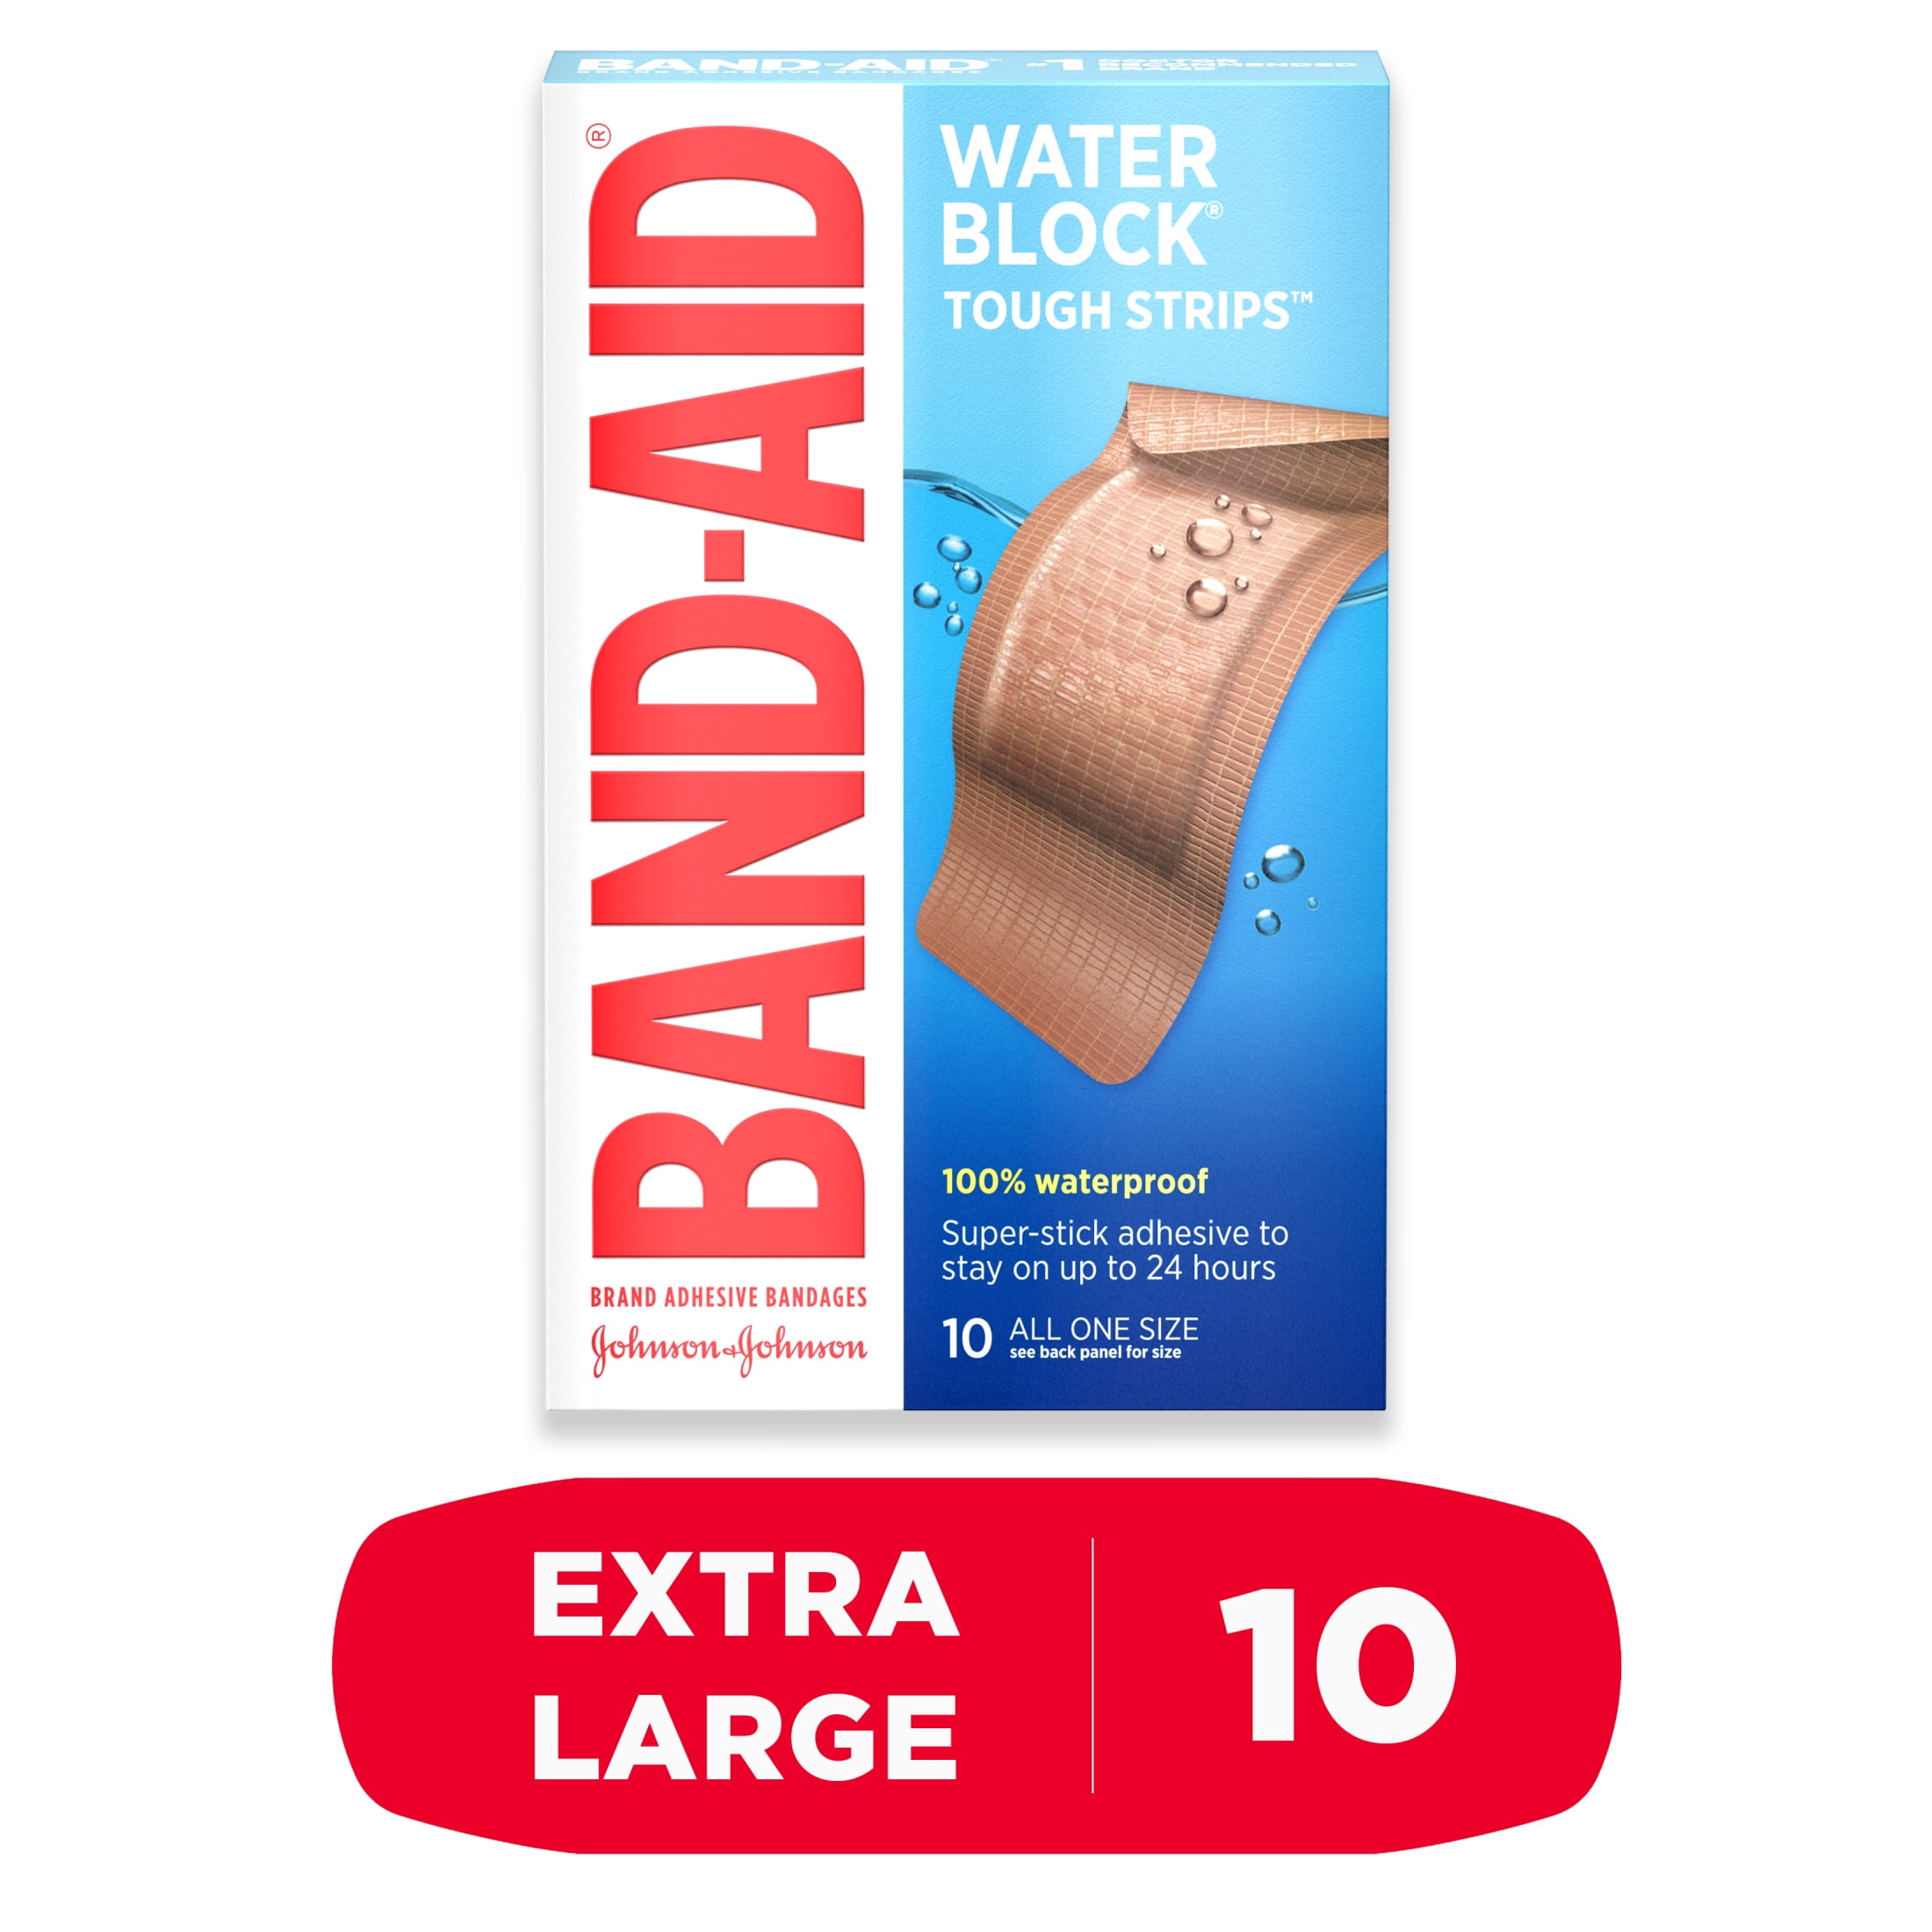 Band-Aid Brand Water Block Tough Strips Bandages, Extra Large